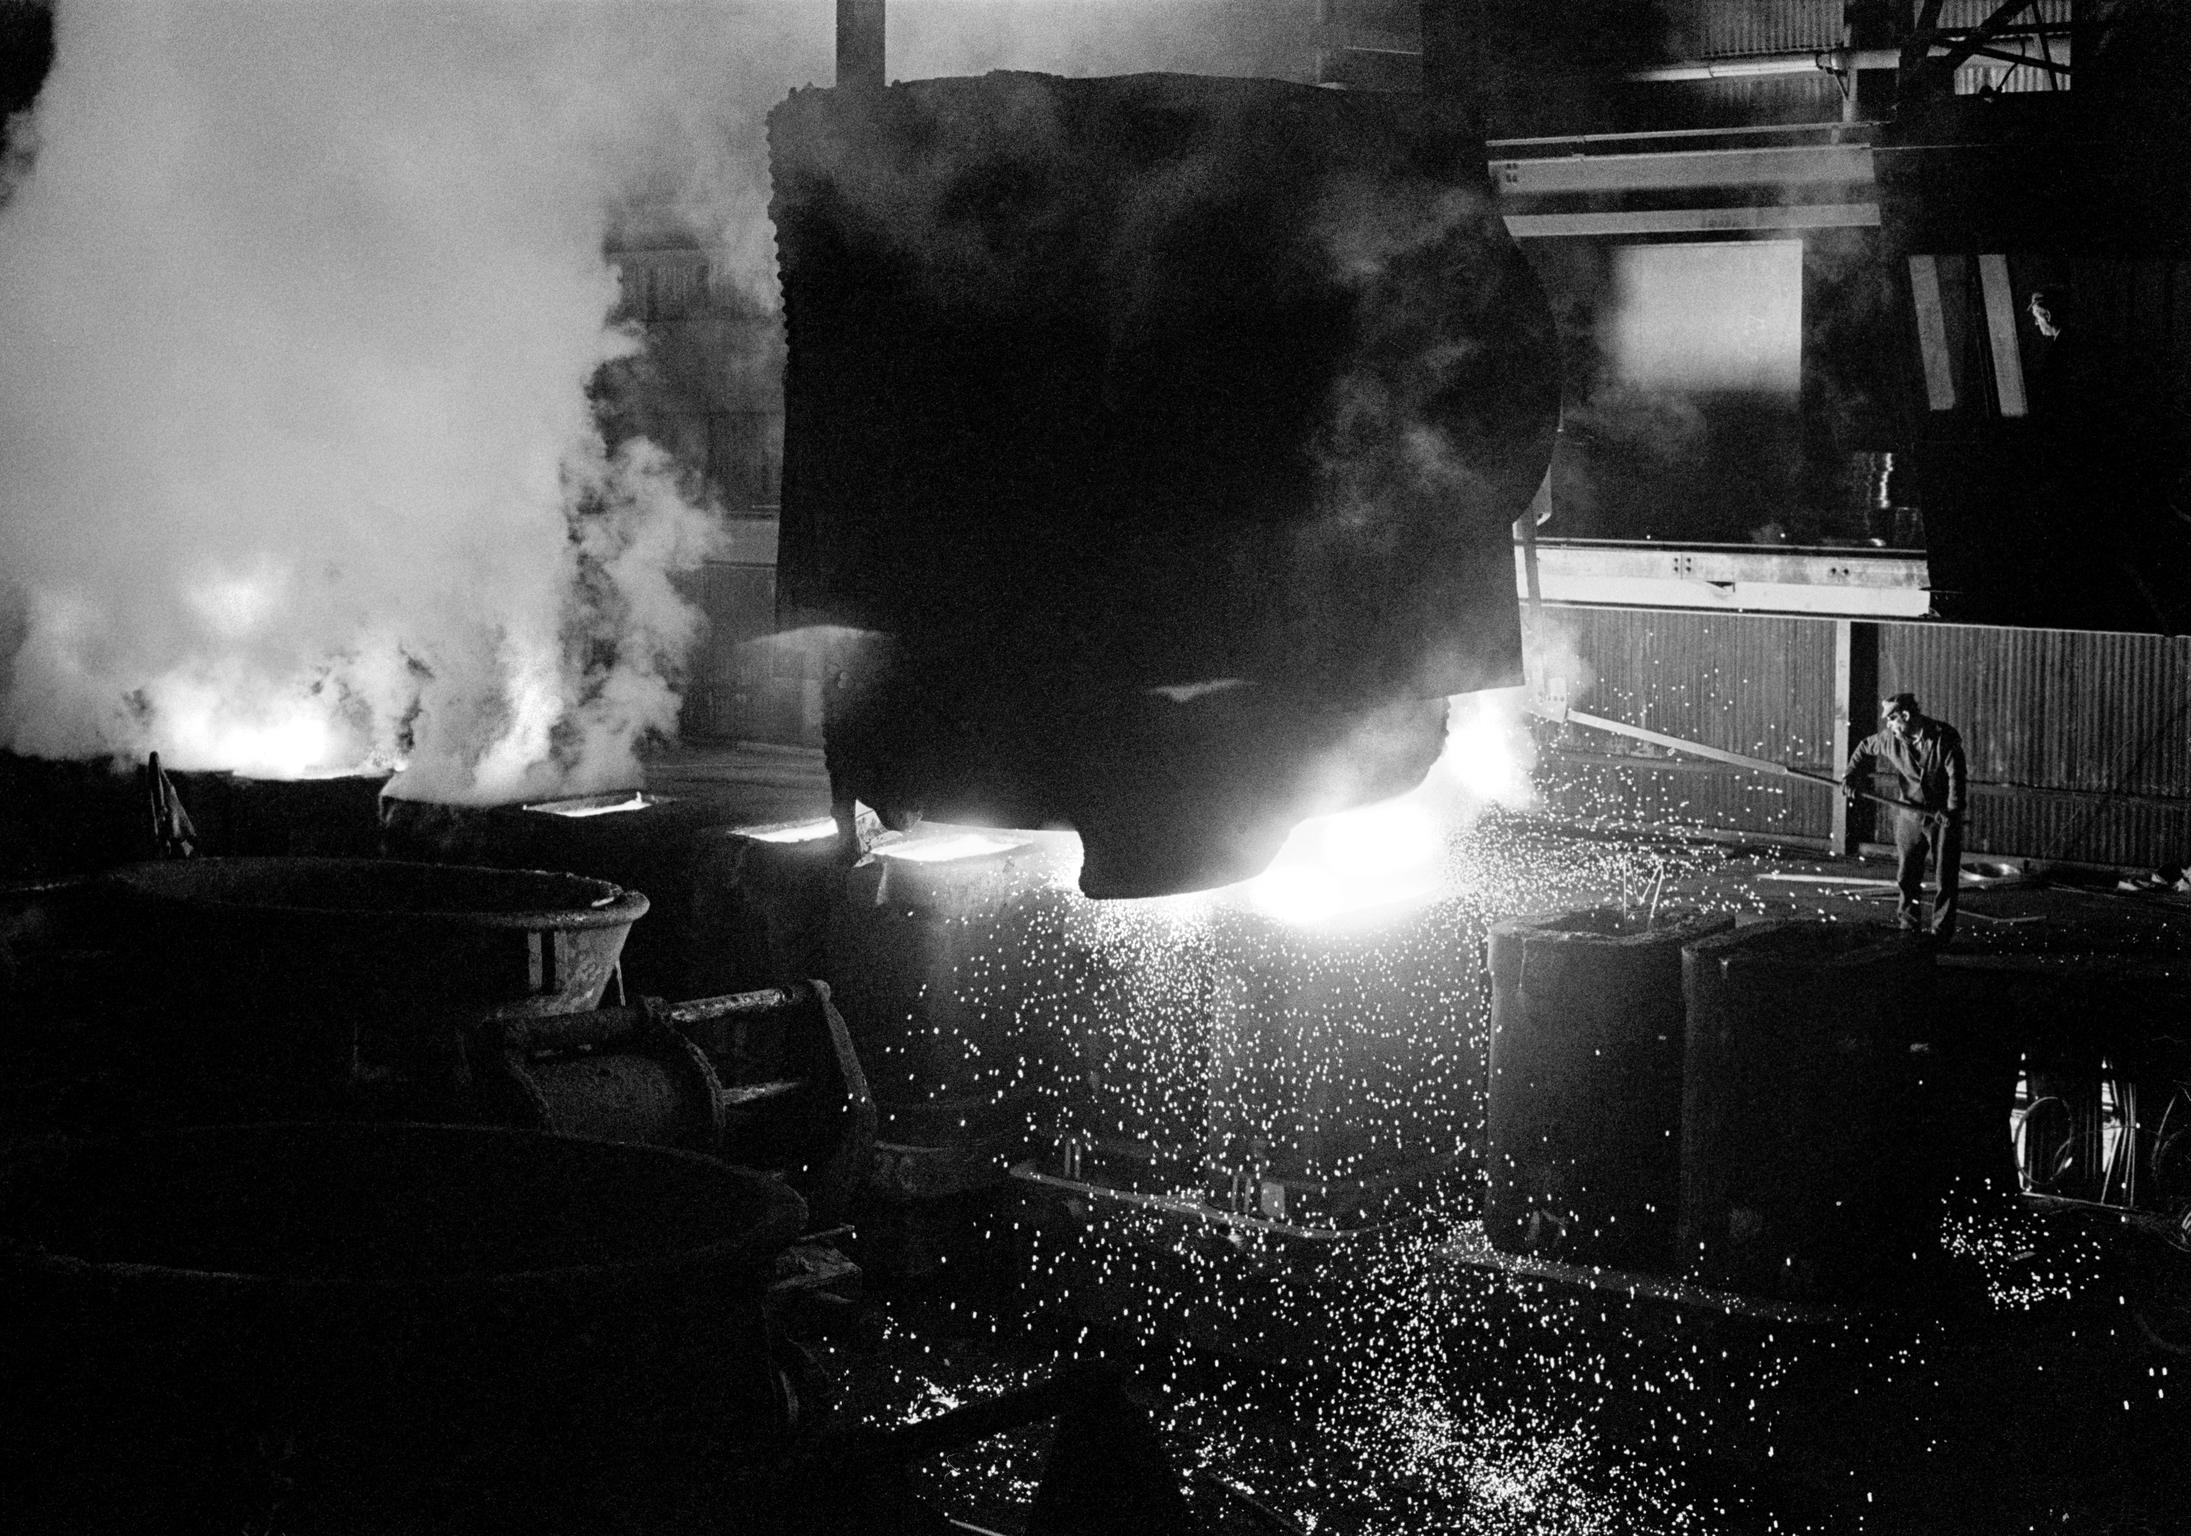 Working in Shotton Steel Works during its last few days before closing. The last pouring. Shotton, Wales